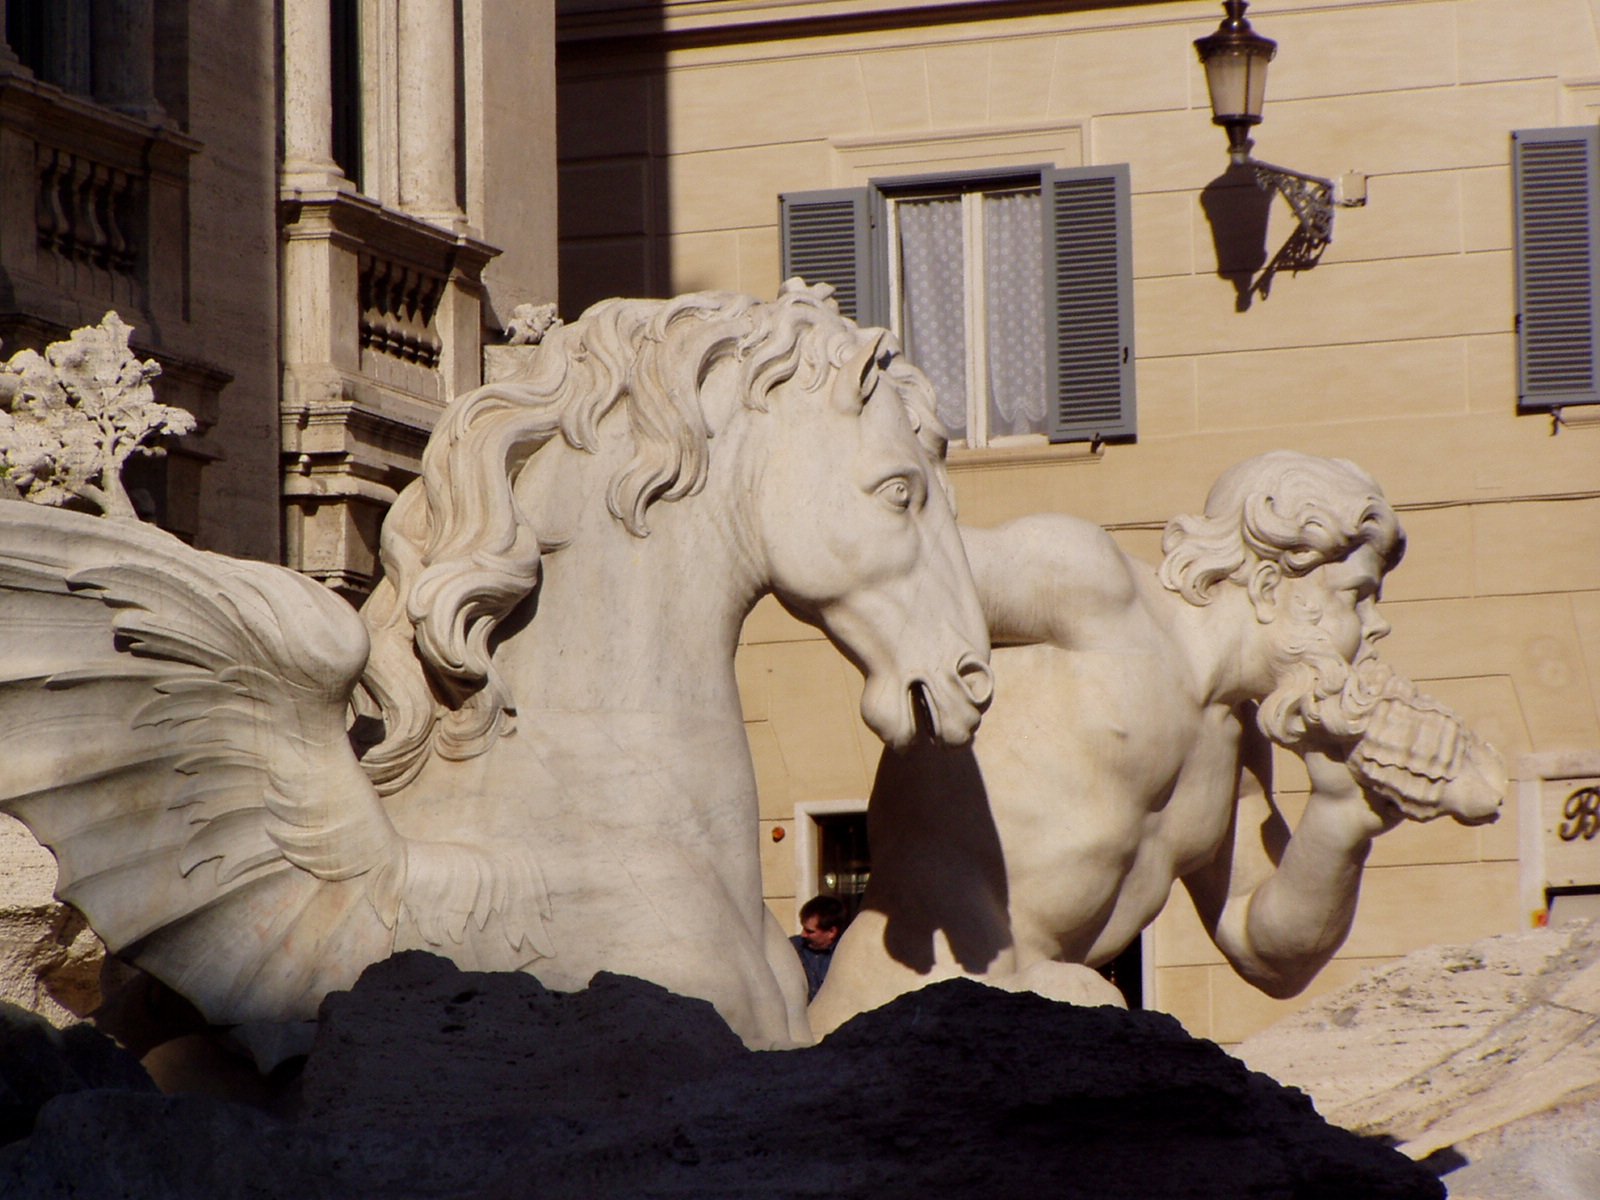 the horses and lion statues are near one another